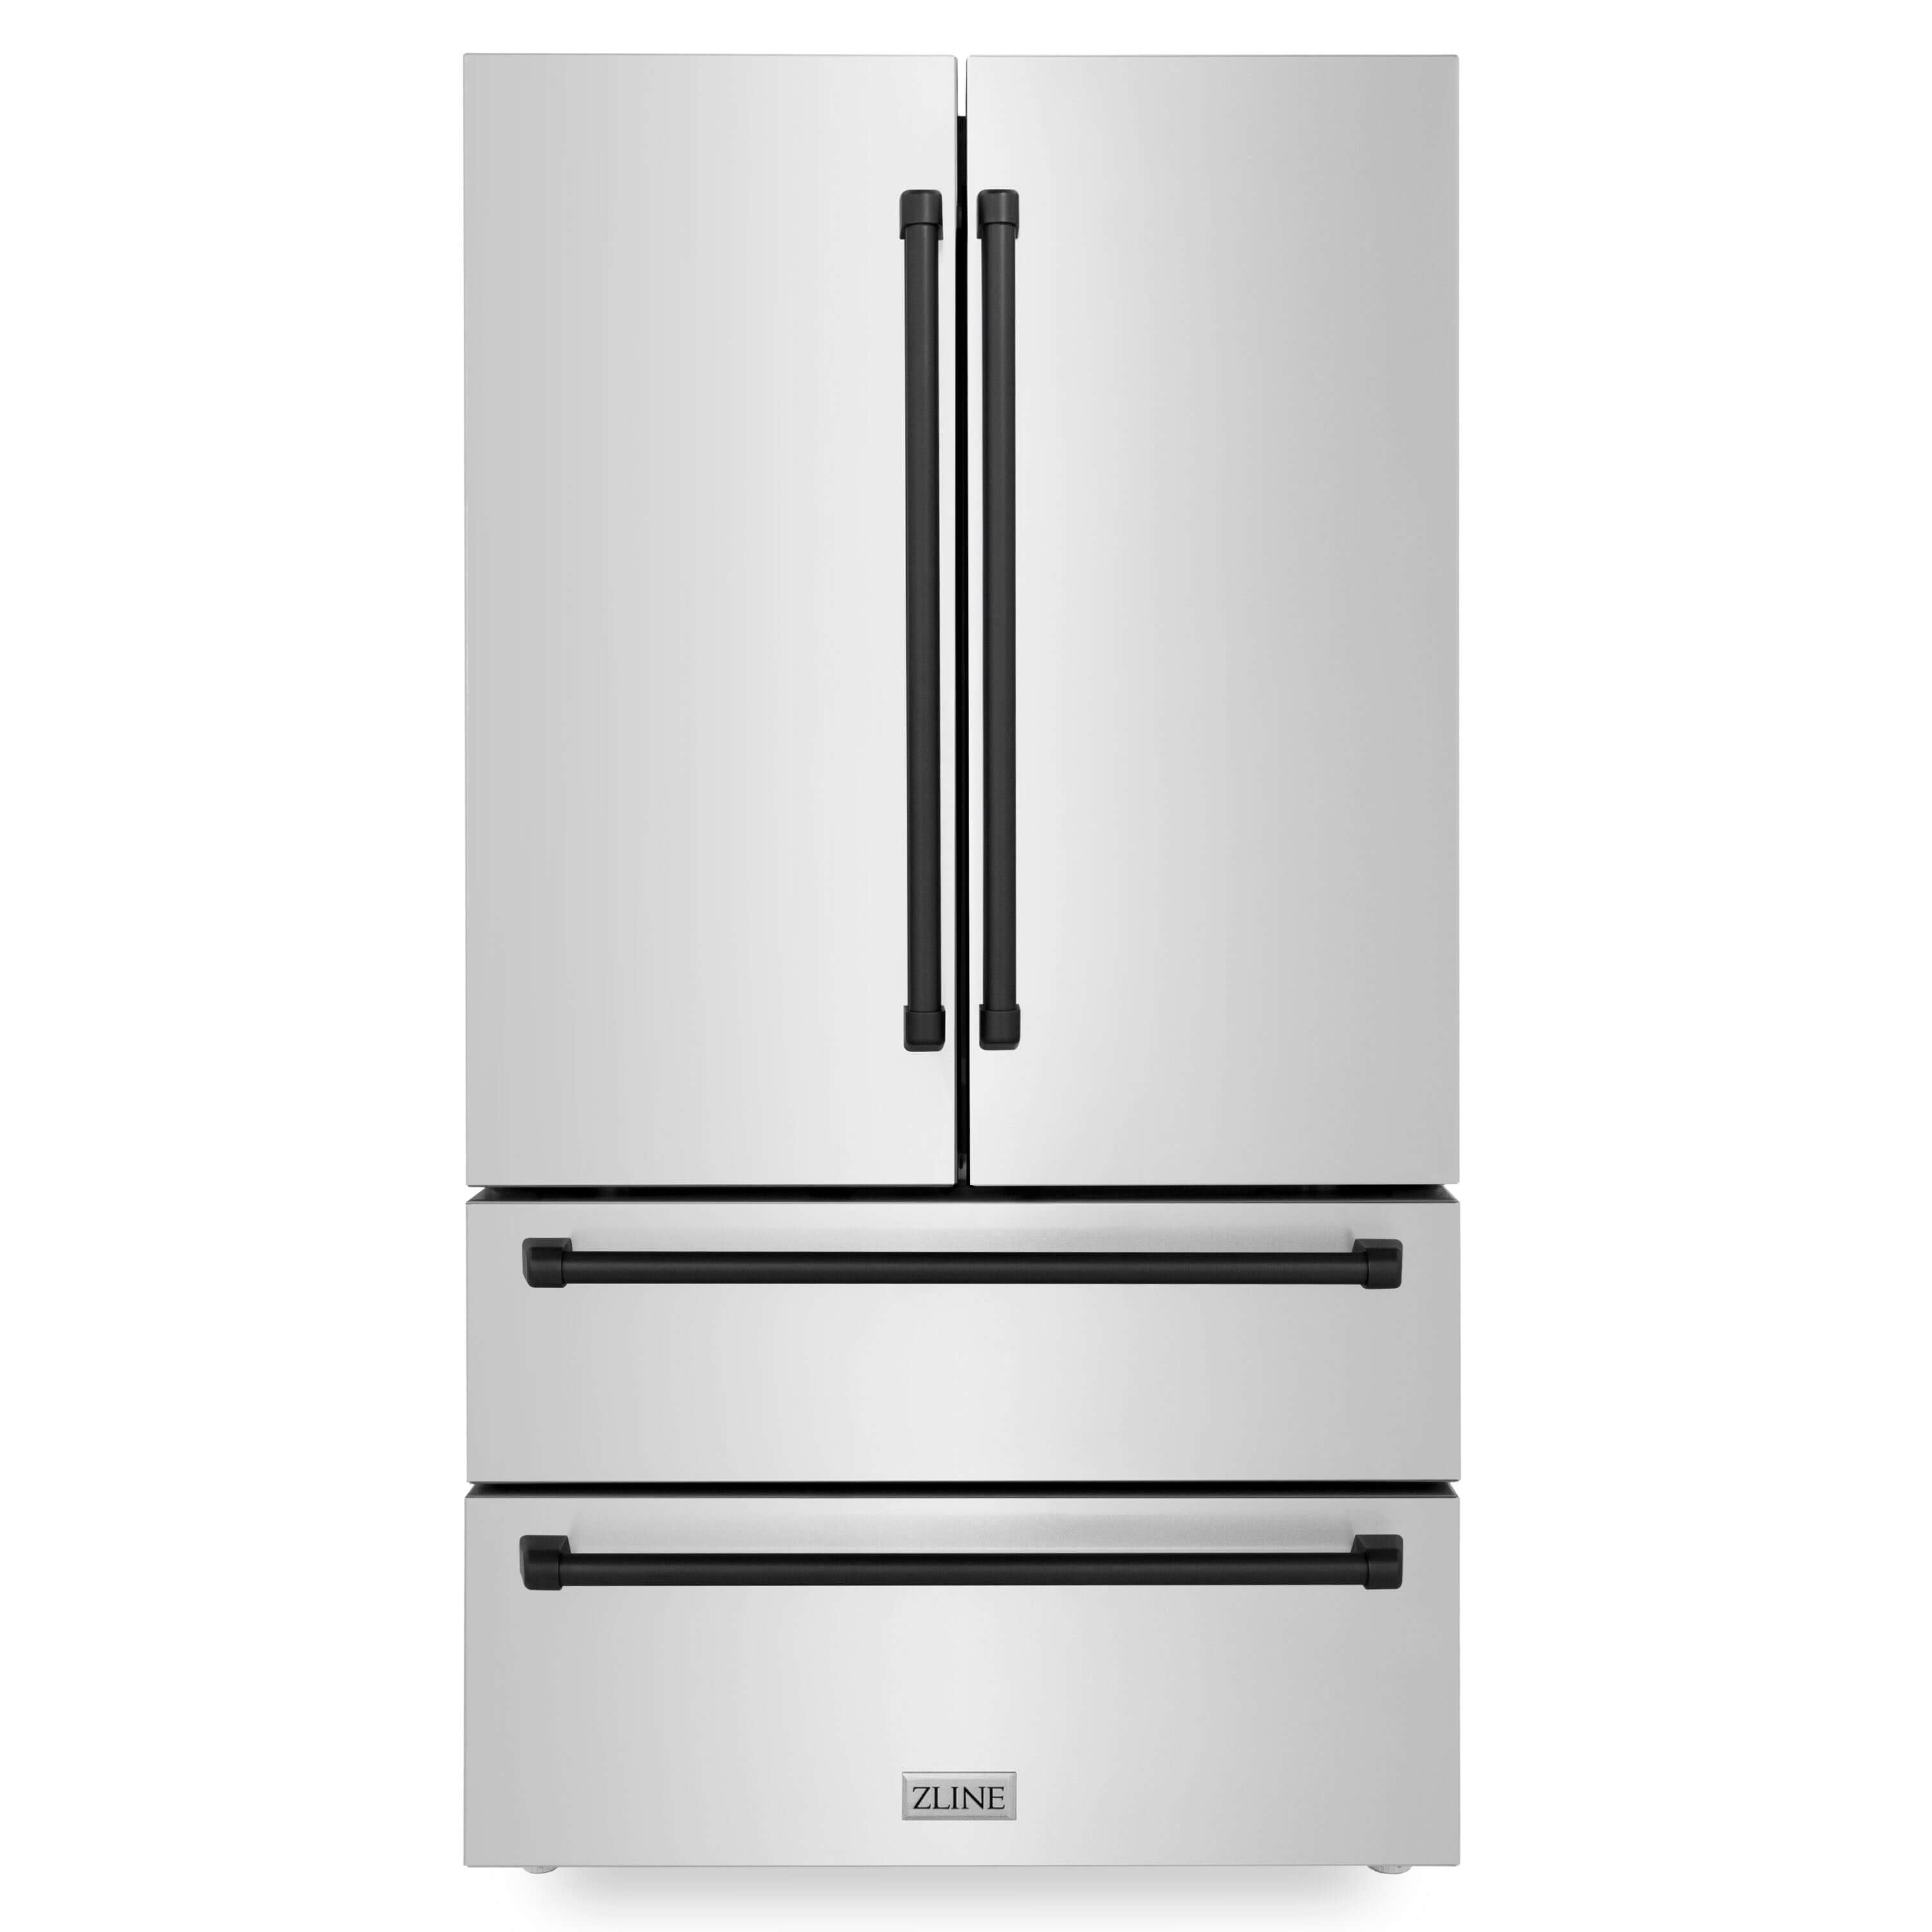 ZLINE Autograph Edition 36 in. 22.5 cu. ft Freestanding French Door Refrigerator with Ice Maker in Fingerprint Resistant Stainless Steel with Matte Black Accents (RFMZ-36-MB)